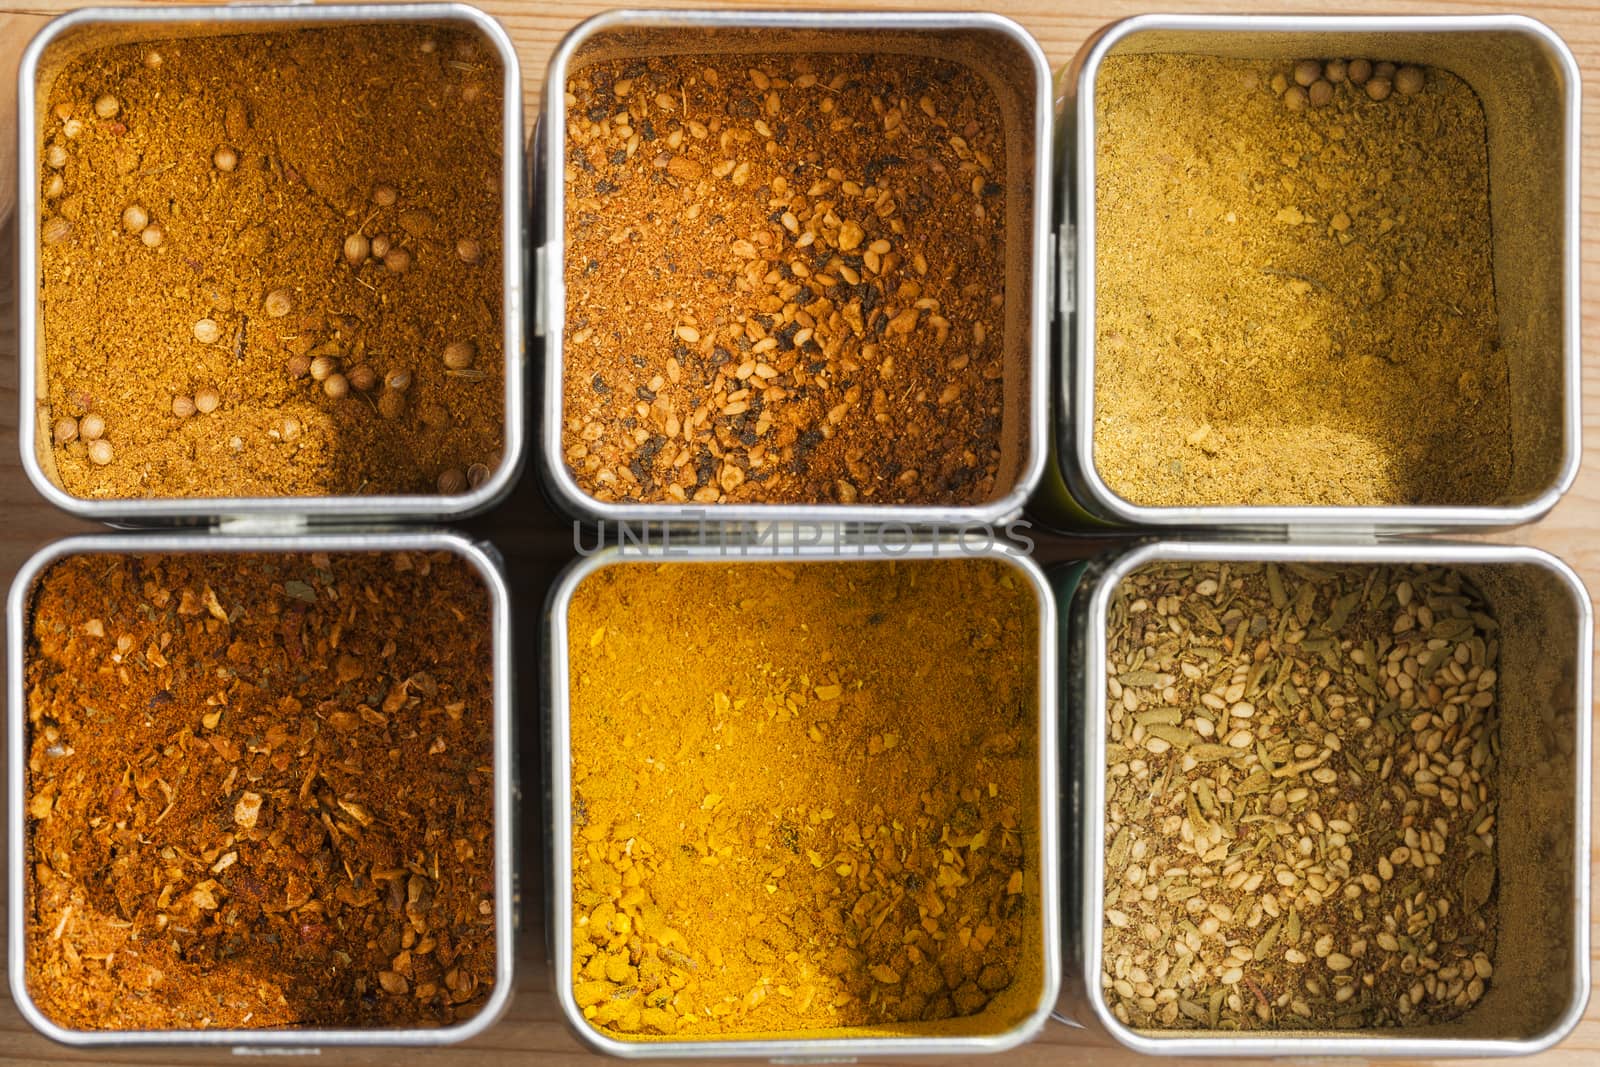 Six different spice mixtures by kievith